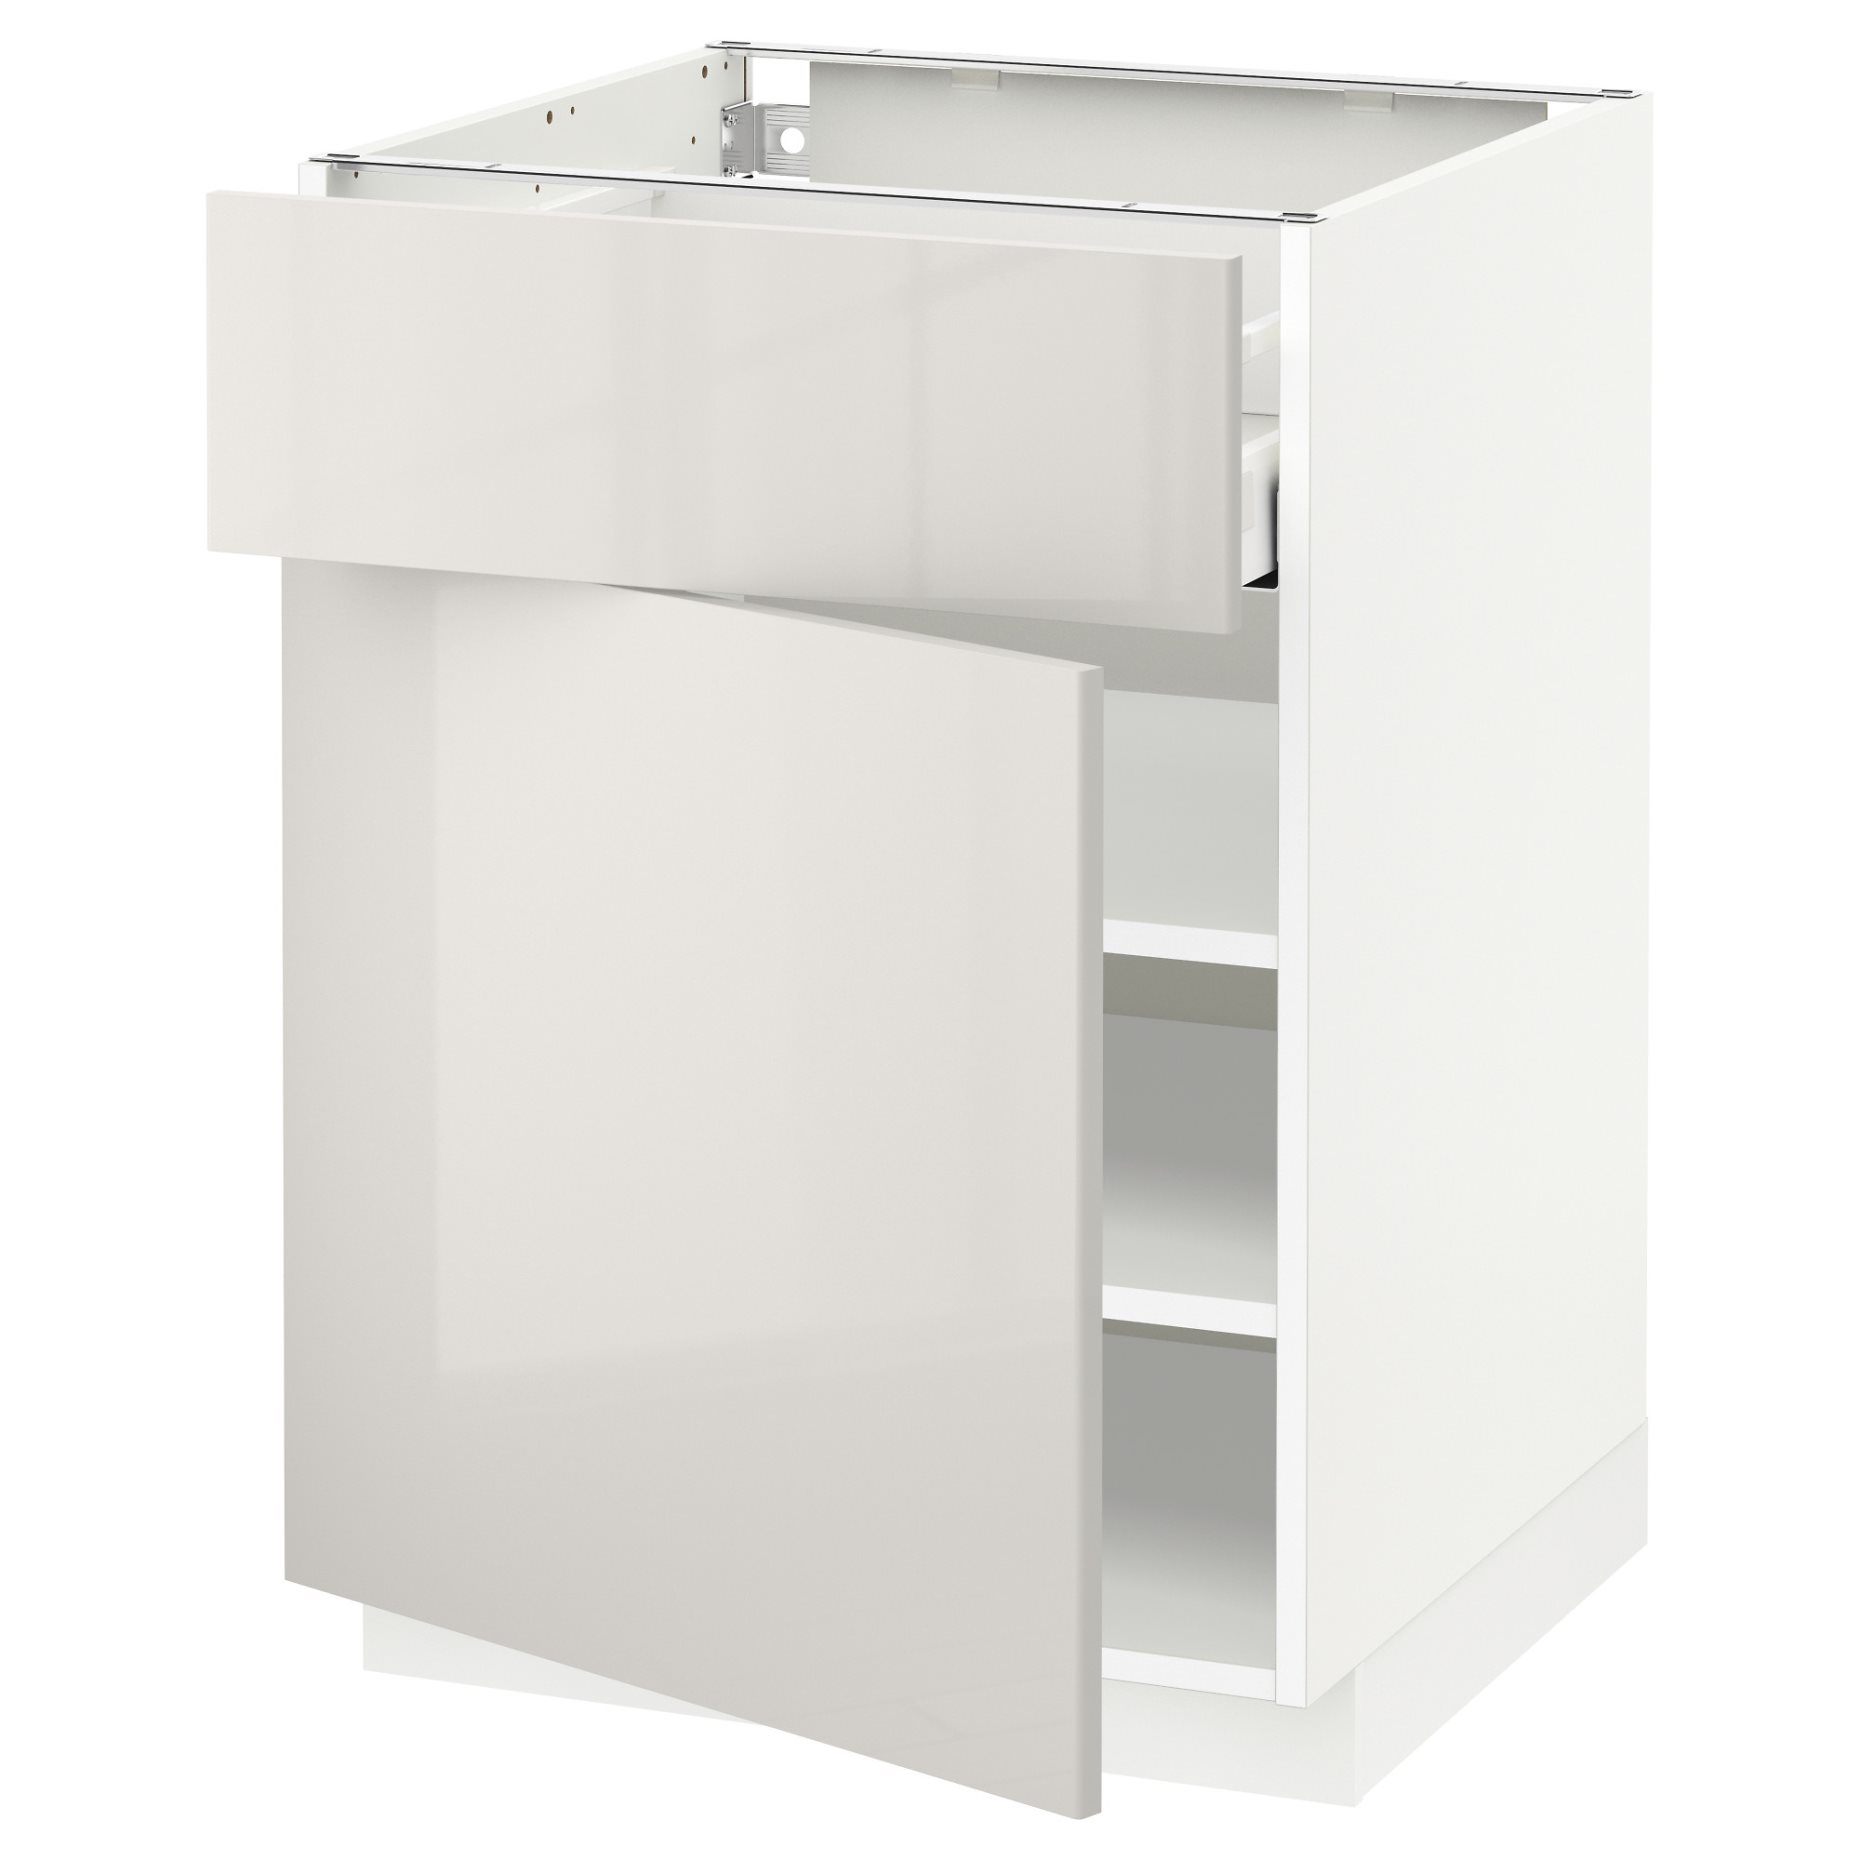 METOD/MAXIMERA, base cabinet with drawer/door, 60x60 cm, 894.640.15